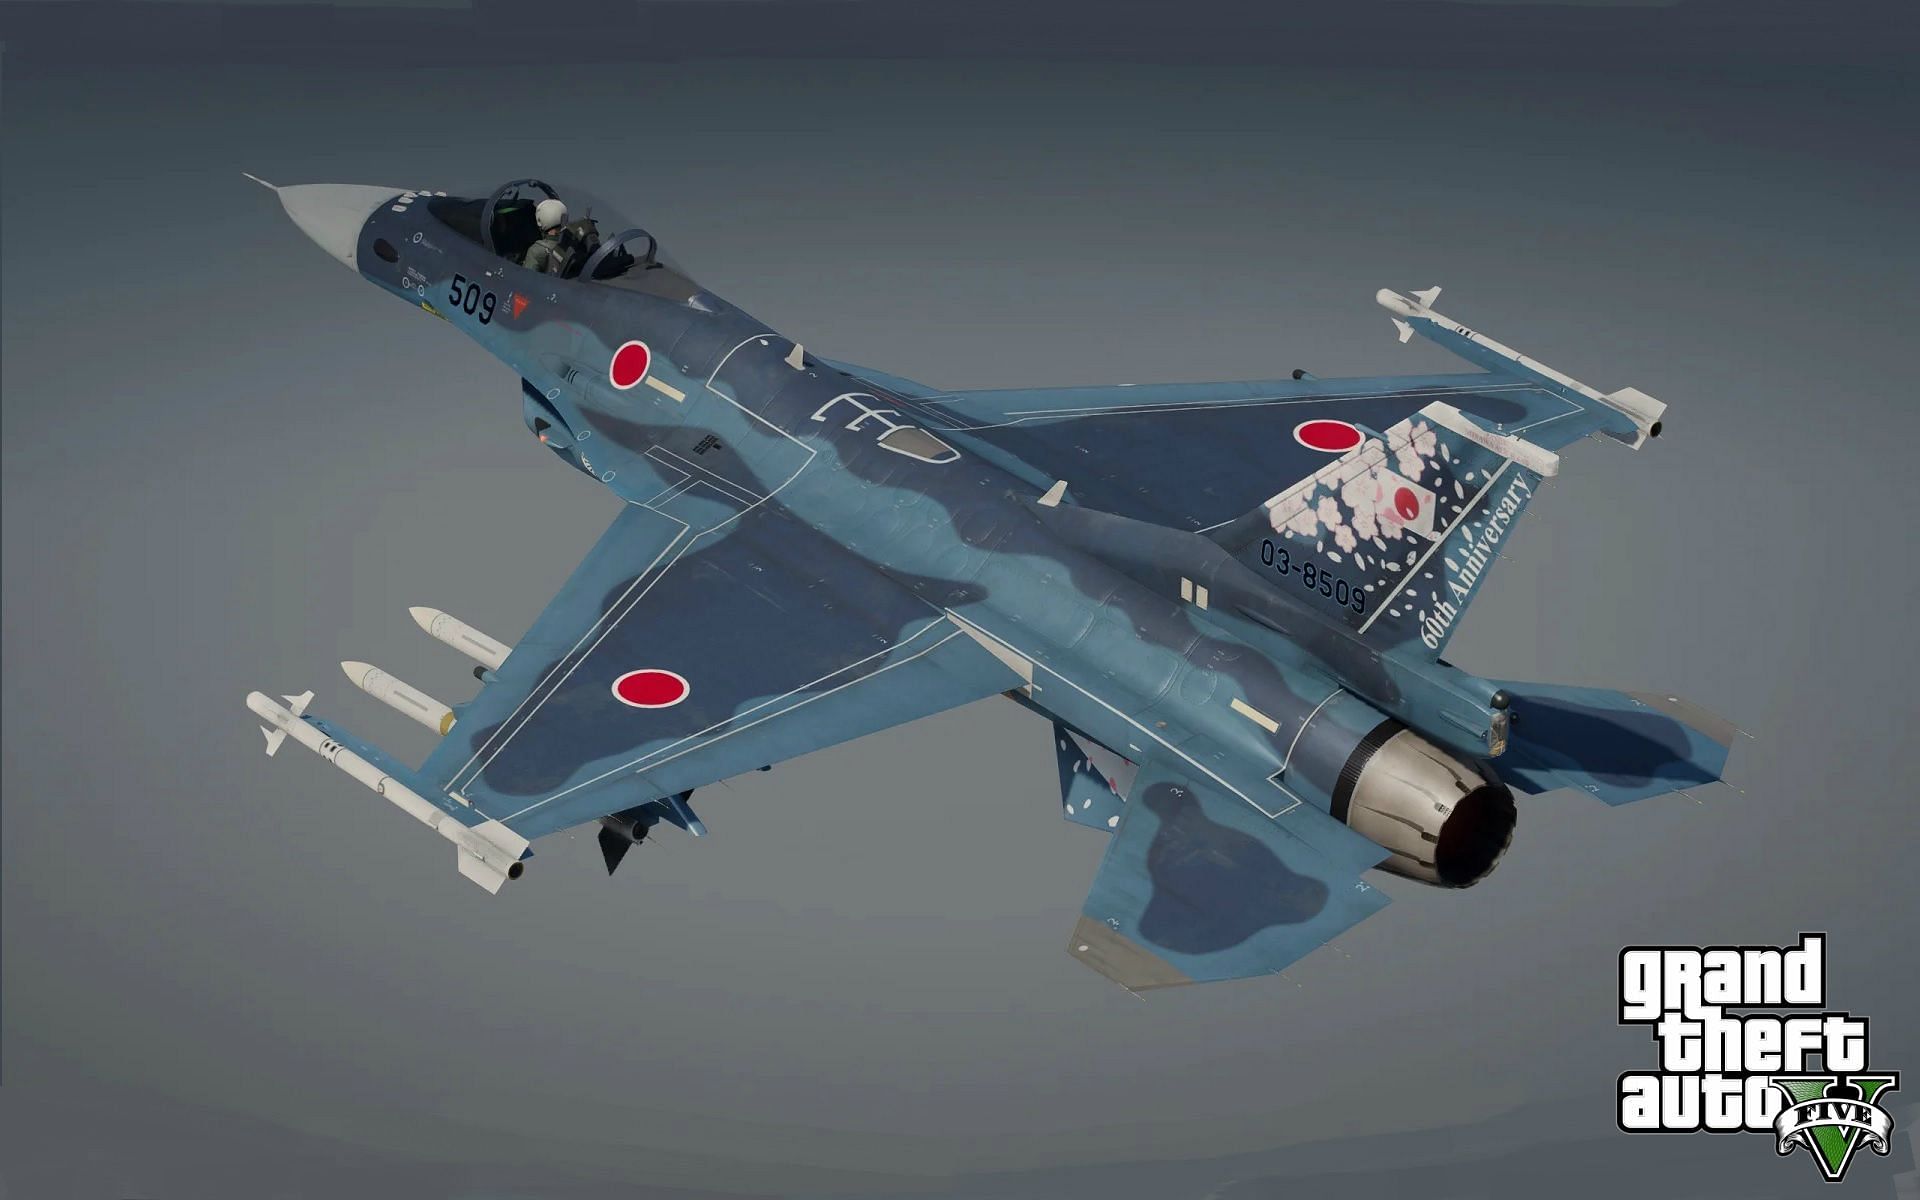 The Mitsubishi F-2A as an add-on jet fighter in GTA 5 (Image via GTA5-Mods.com)